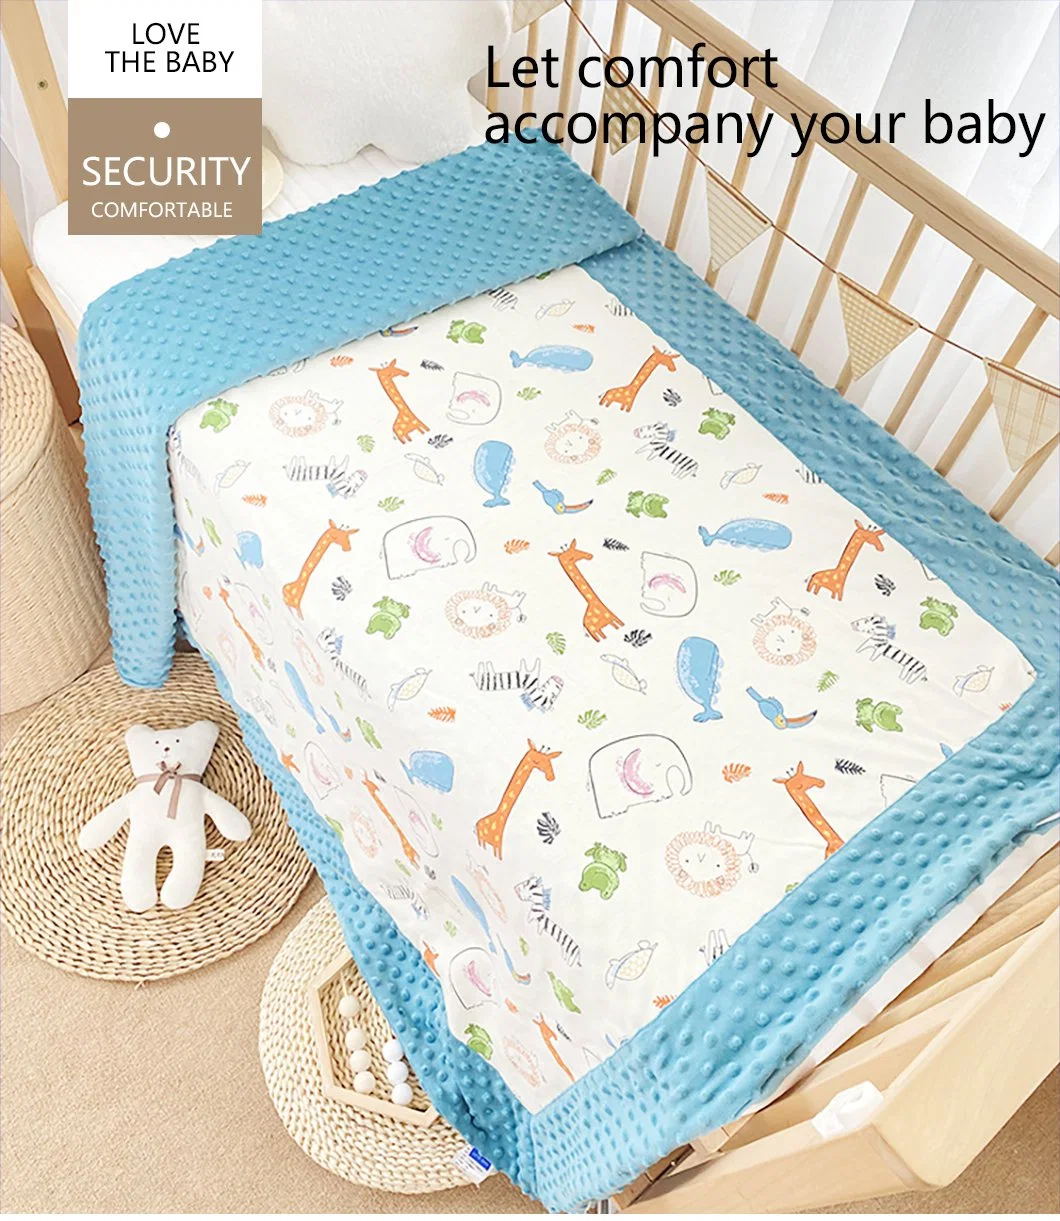 Super Soft and Skin-Friendly Cotton Baby Quilt Lightweight and Warm Baby Soothing Blanket Skin-Friendly Breathable Can Be Custom